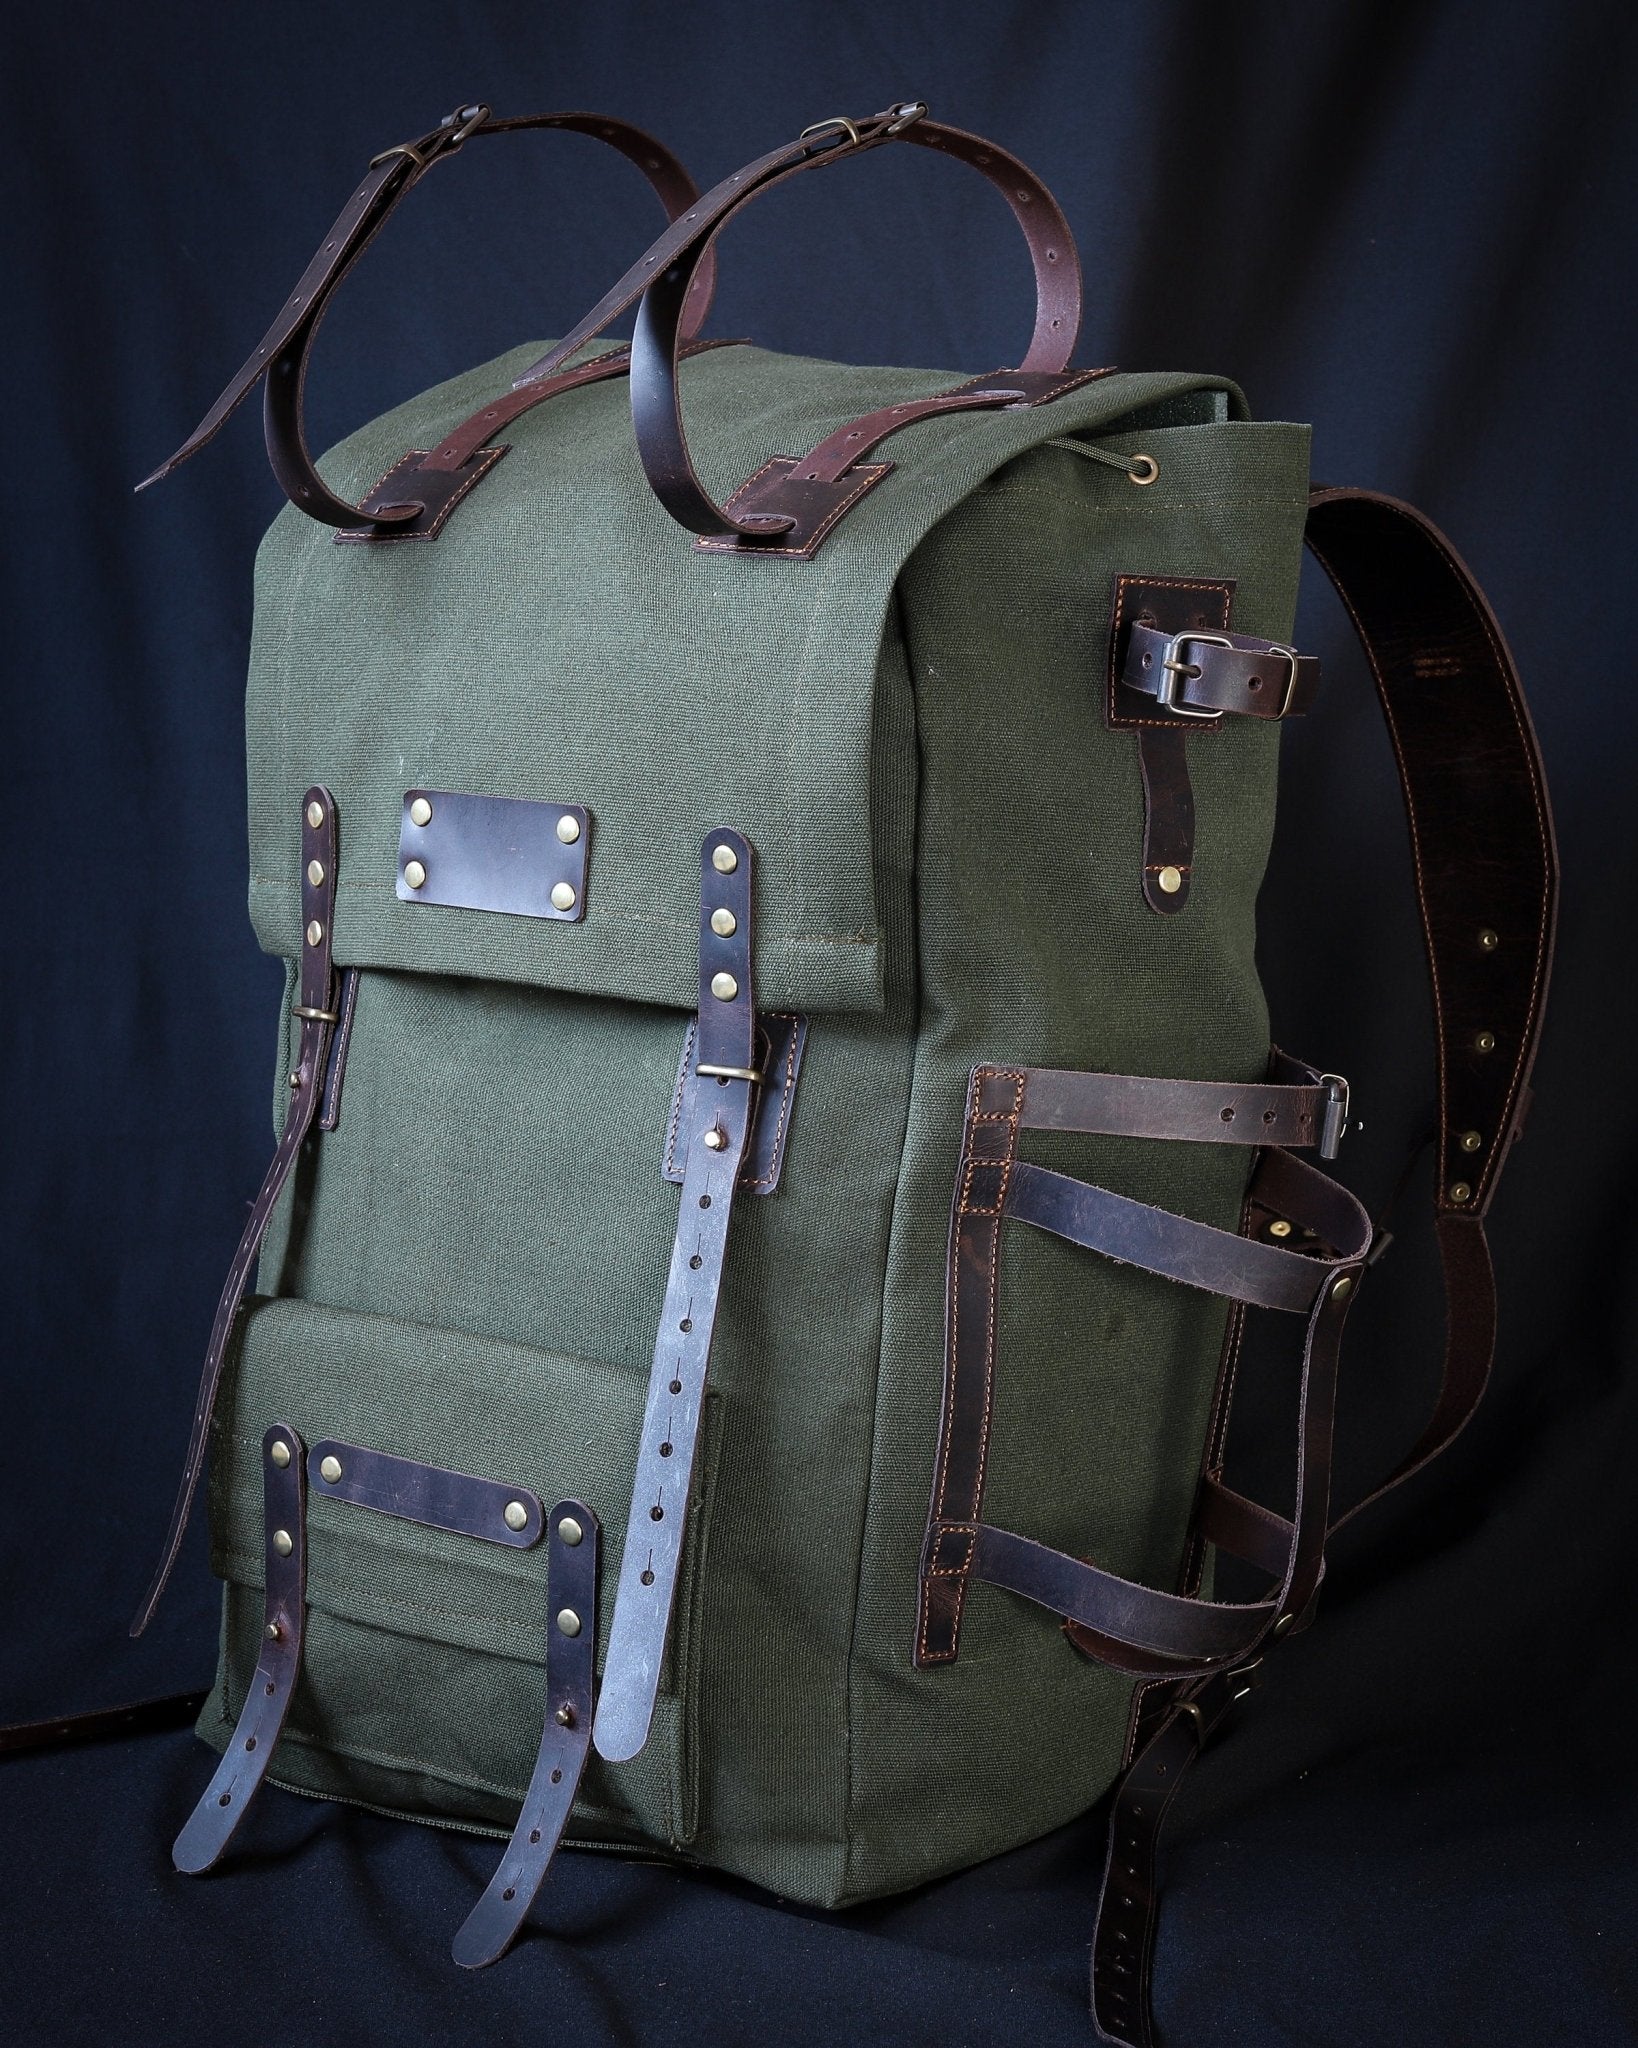 New Green Released Handmade Genuine Green Leather and Waxed Canvas Backpack for Travel, Camping | 40 Liter |   Personalization  99percenthandmade   